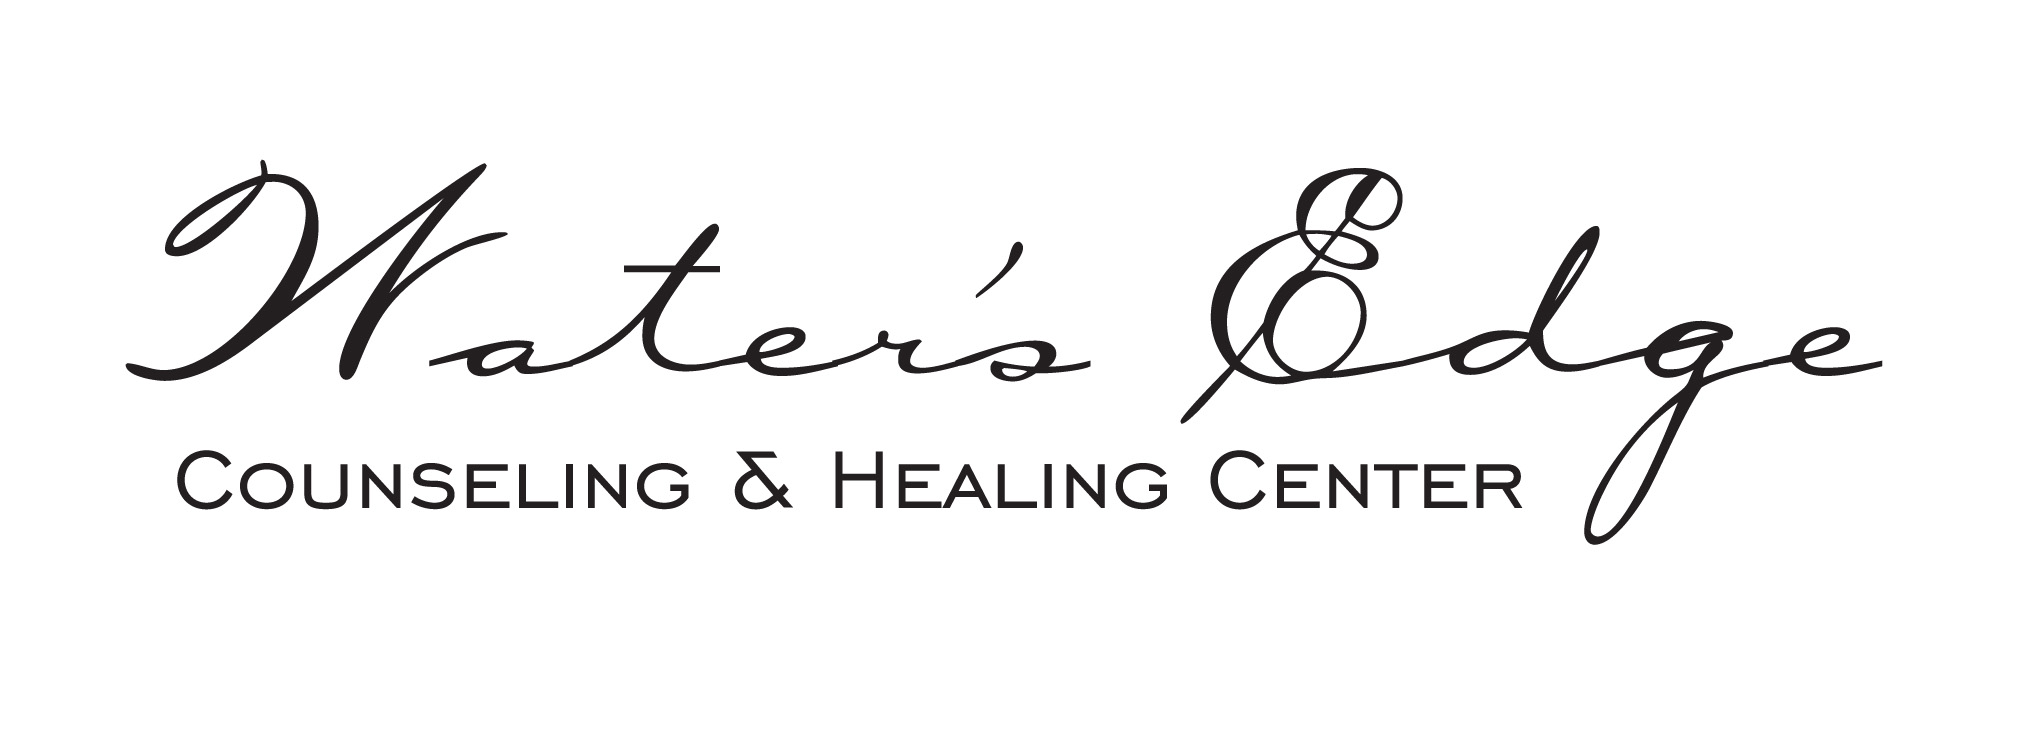 Water’s Edge Counseling & Healing Center